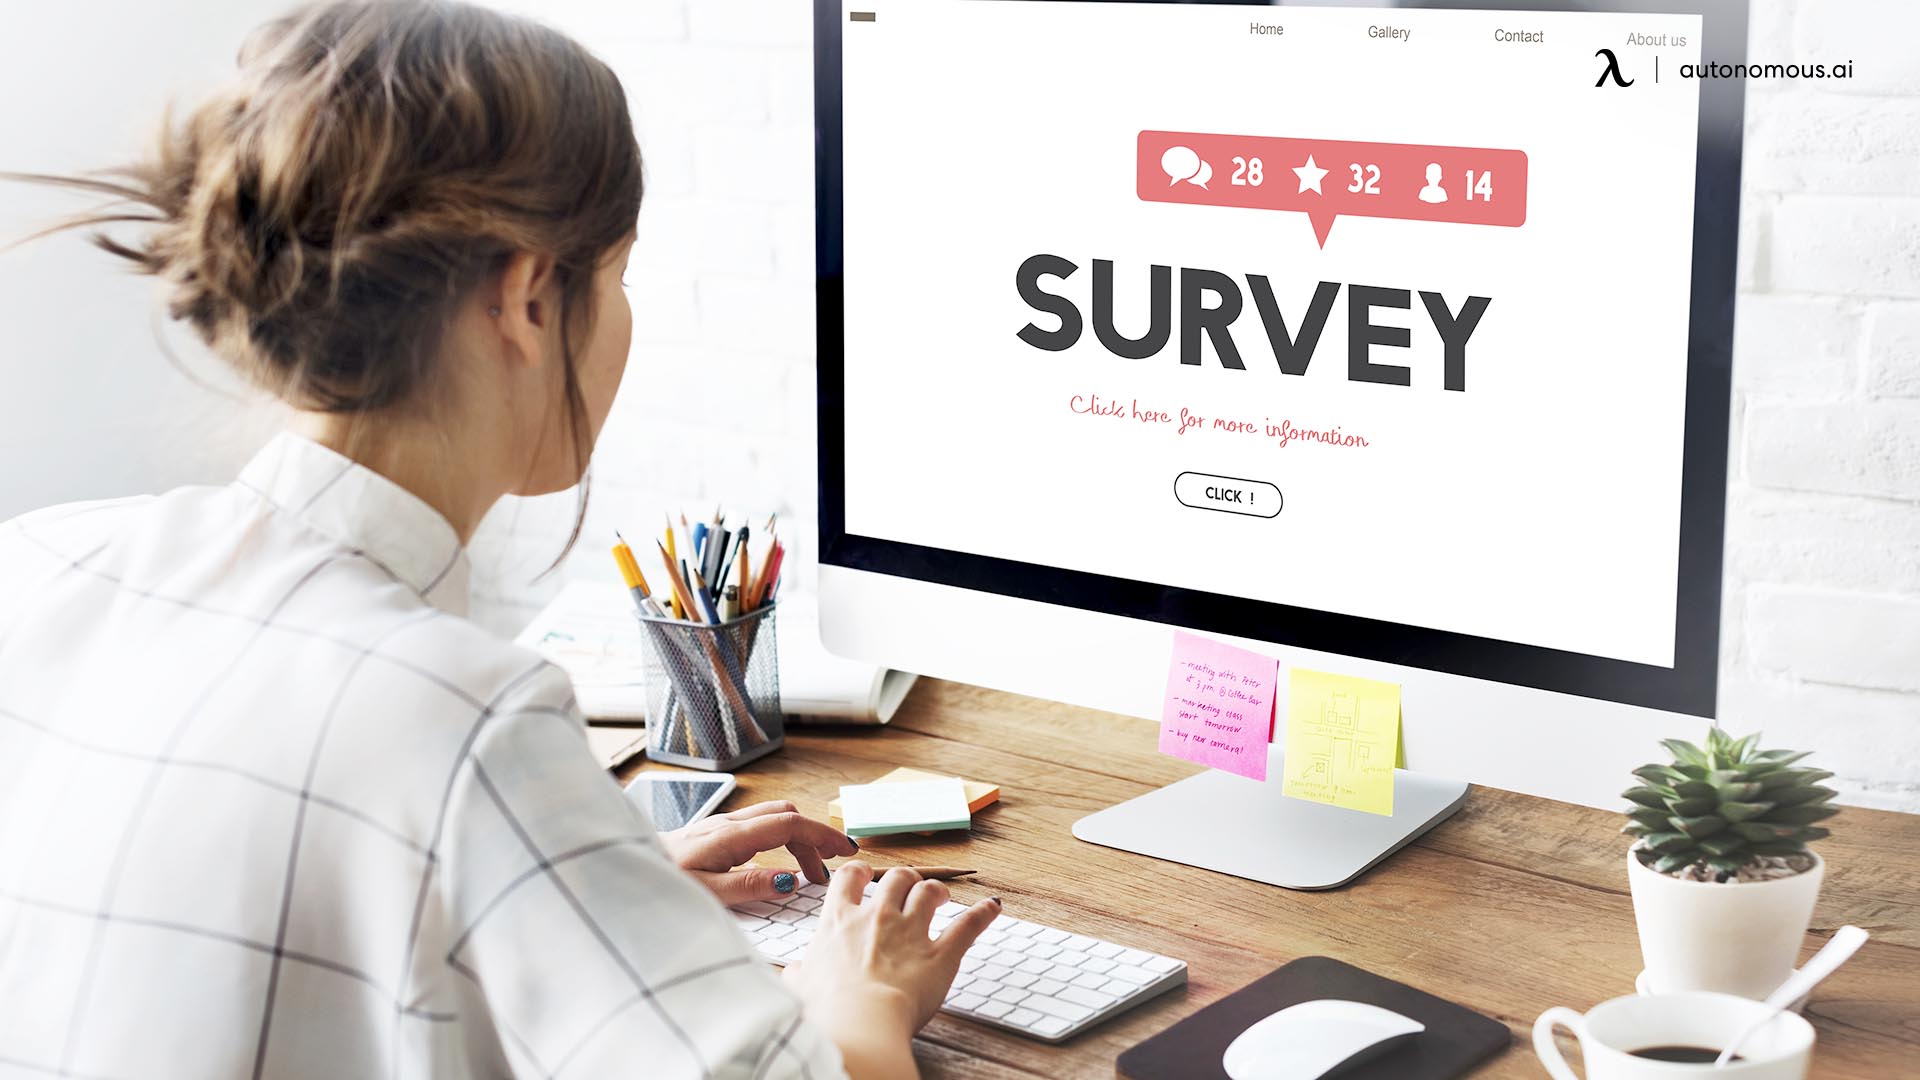 How to Make an Employee Recognition Survey